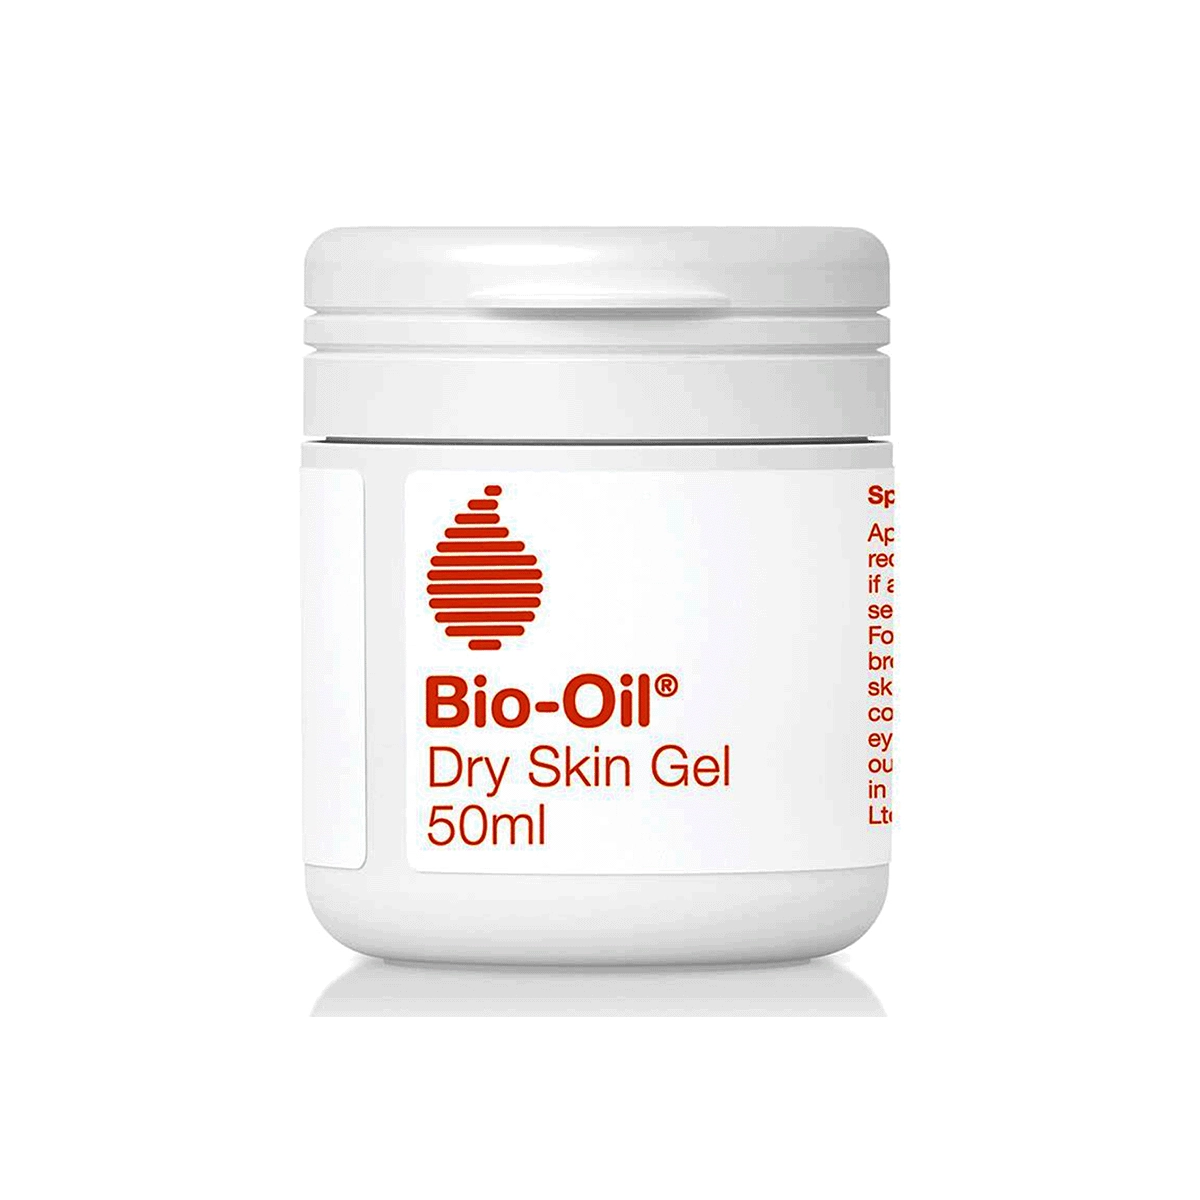 First product image of Bio-Oil Dry Skin Gel 50ml